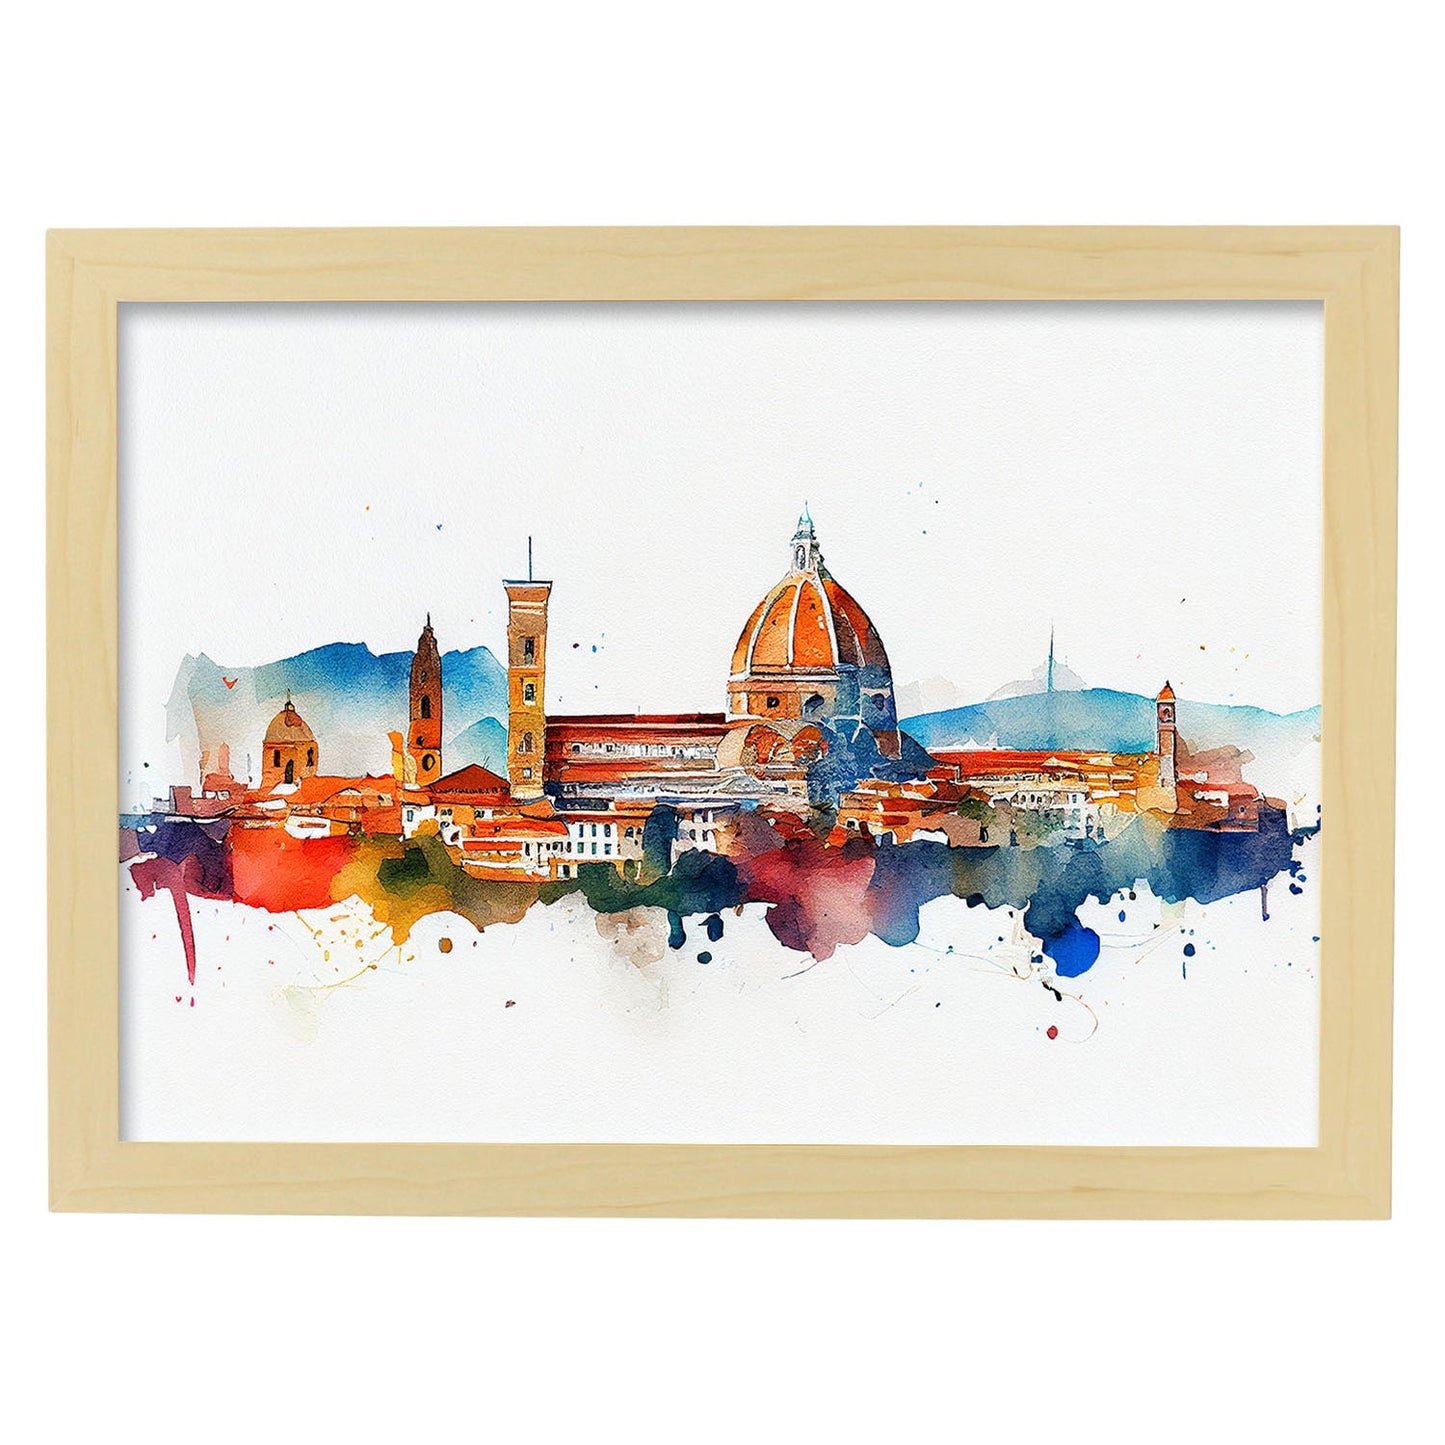 Nacnic watercolor of a skyline of the city of Florence_1. Aesthetic Wall Art Prints for Bedroom or Living Room Design.-Artwork-Nacnic-A4-Marco Madera Clara-Nacnic Estudio SL